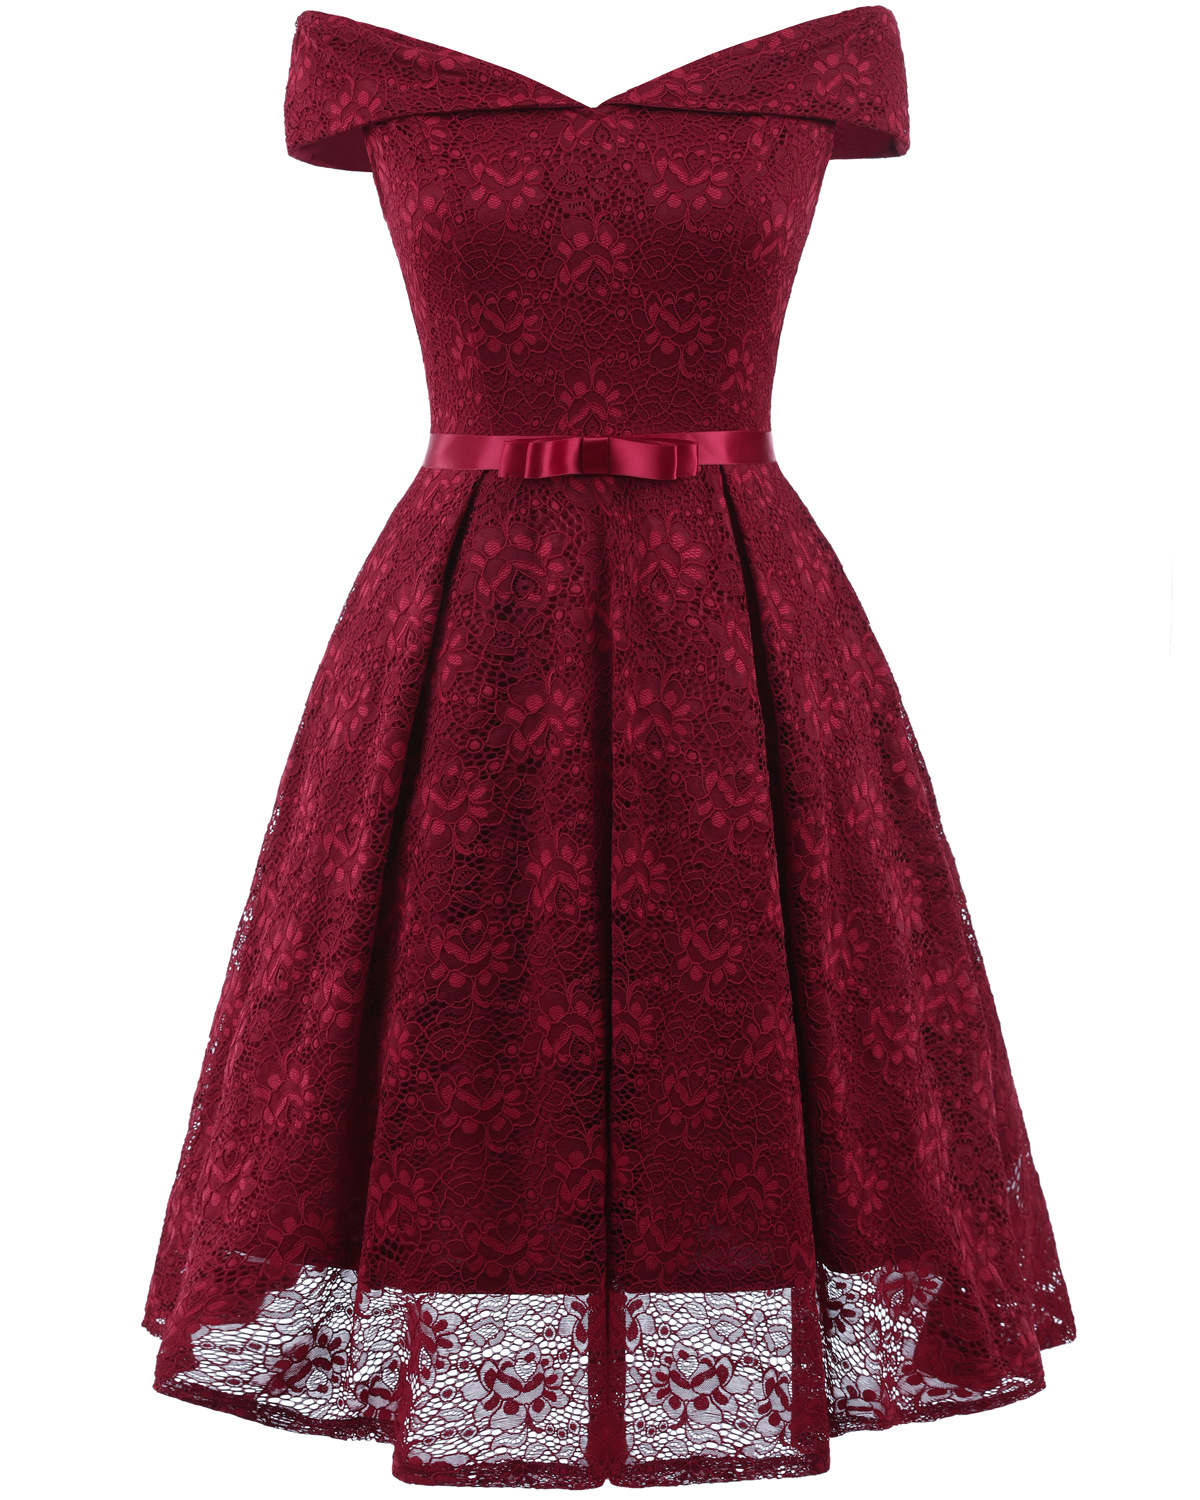 Fashion Burgundy Lace Dress A Line Women Bridesmaid Party Gowns Soft Lace Homecoming Maix Dresses Cheap. Mini Party Gowns 